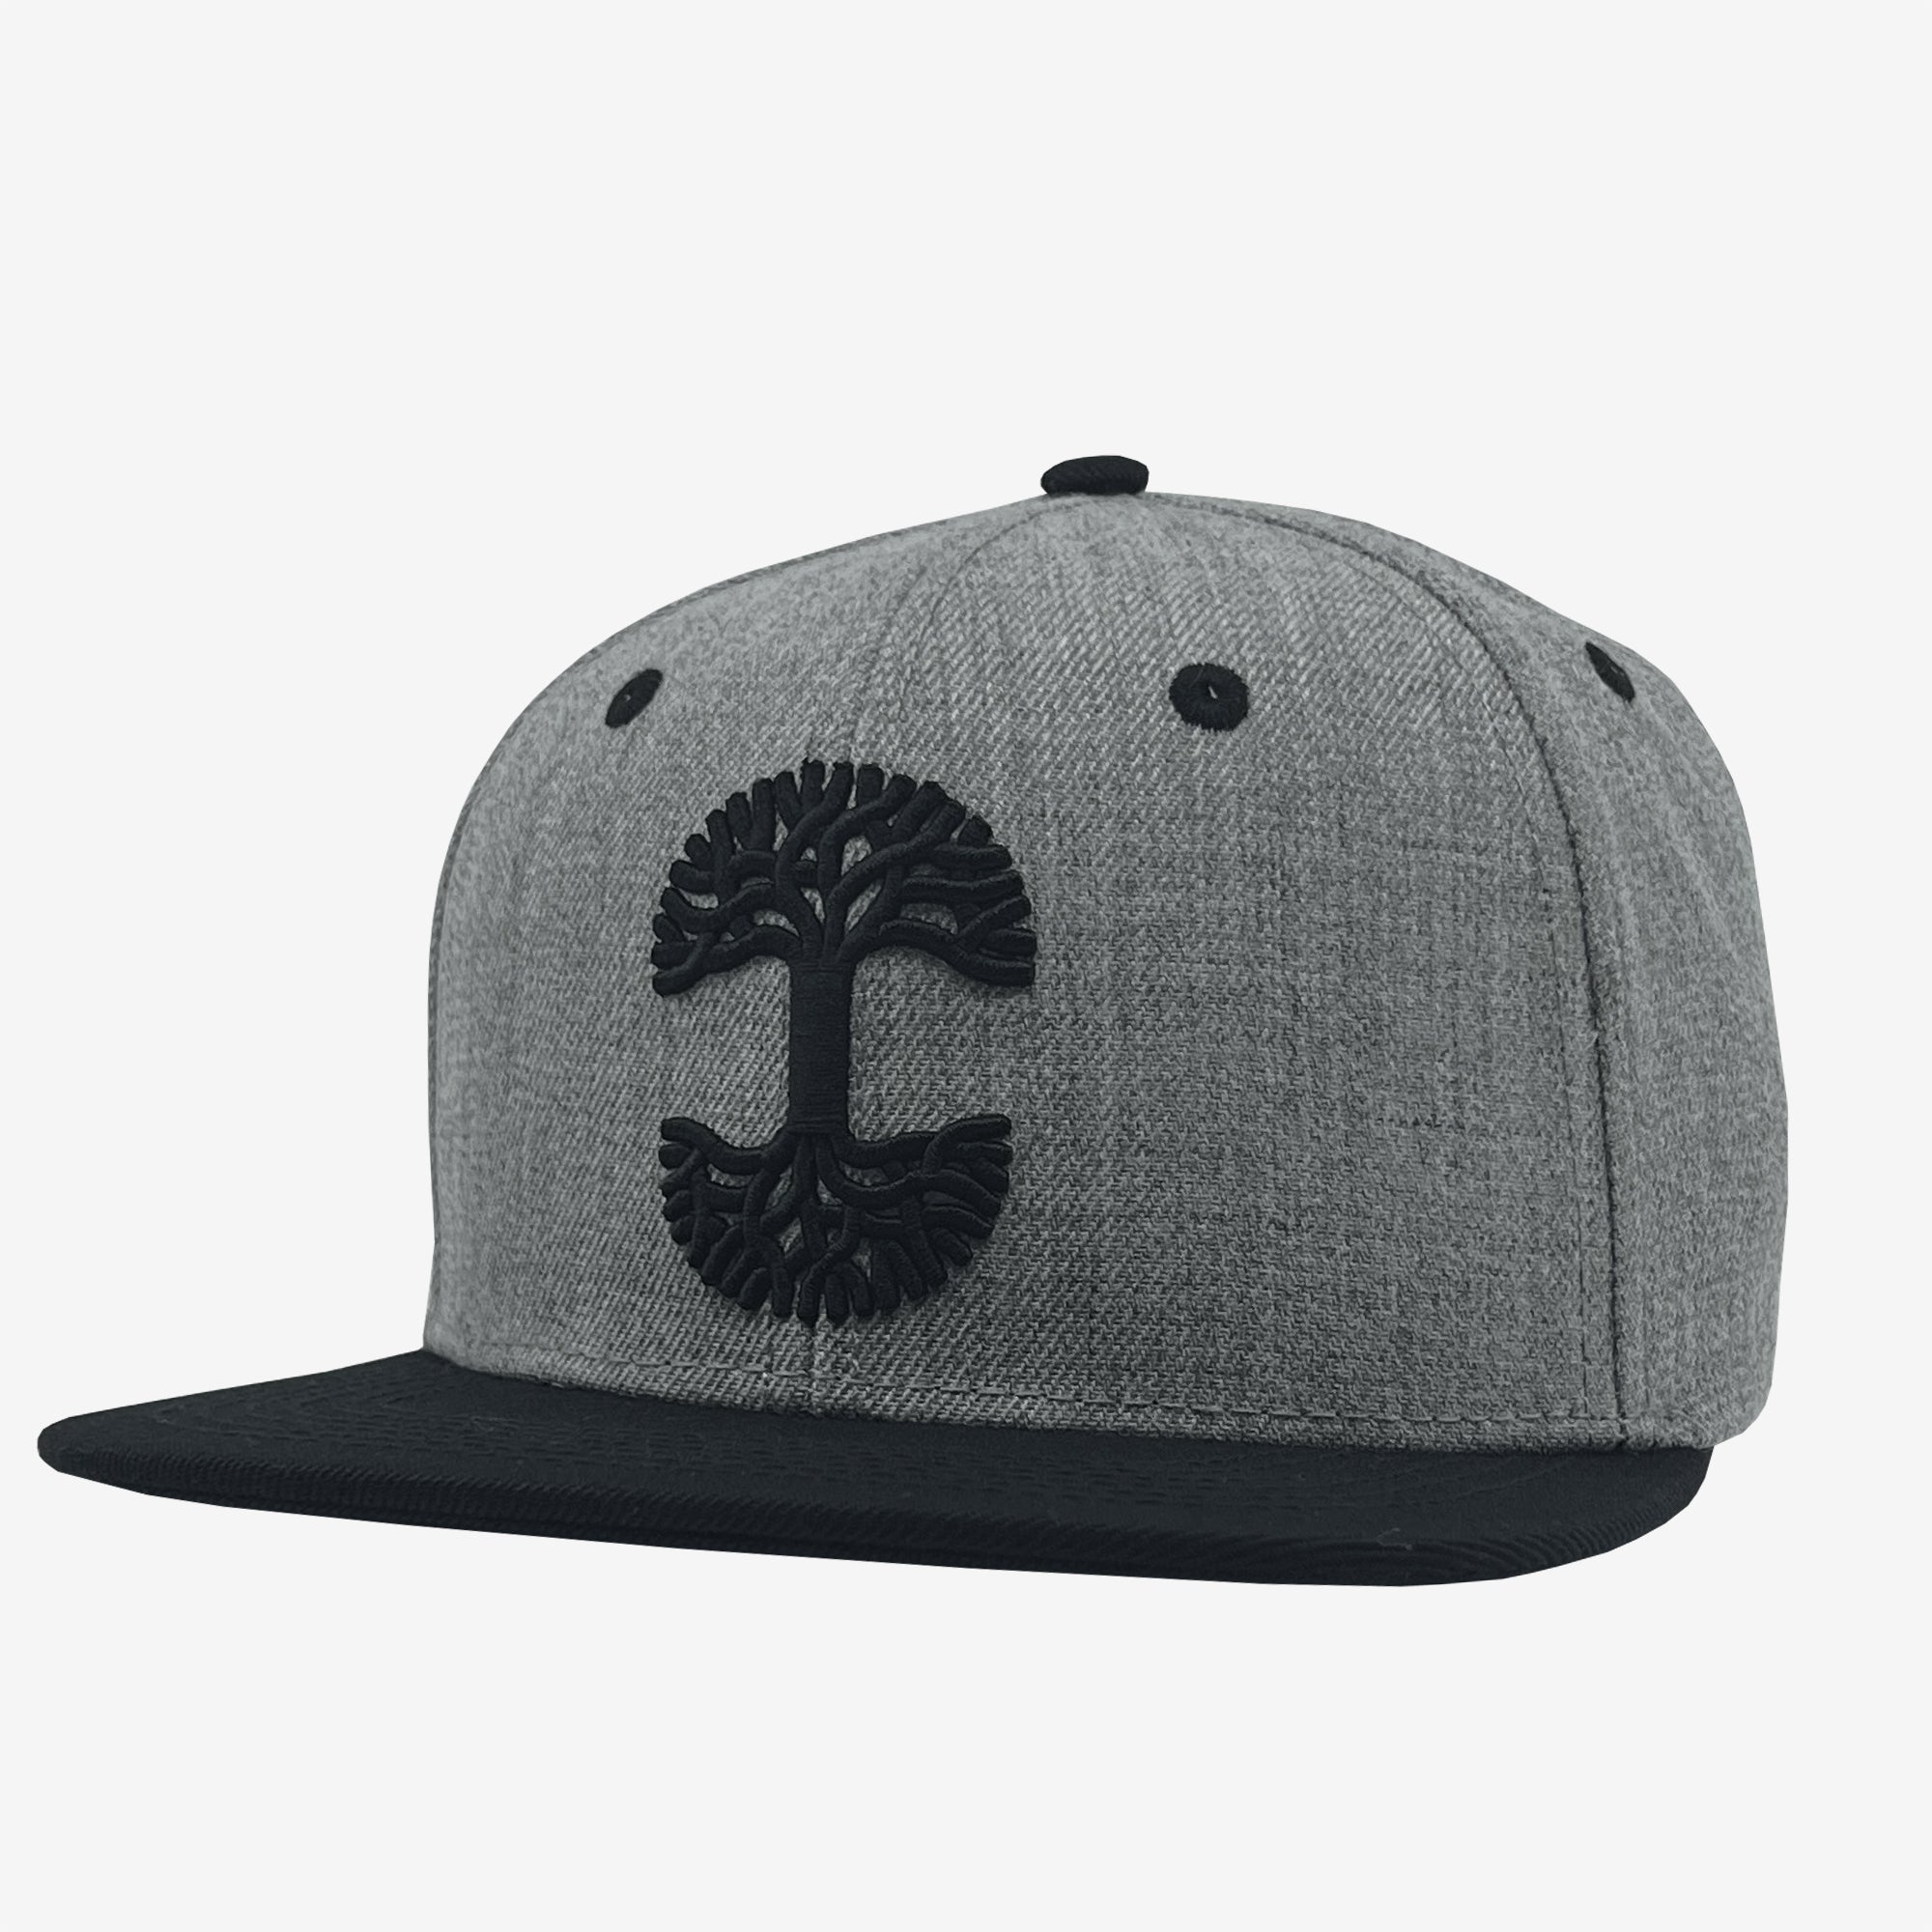 Grey cap with black embroidered Oaklandish tree logo on crown and black contrasting visor.